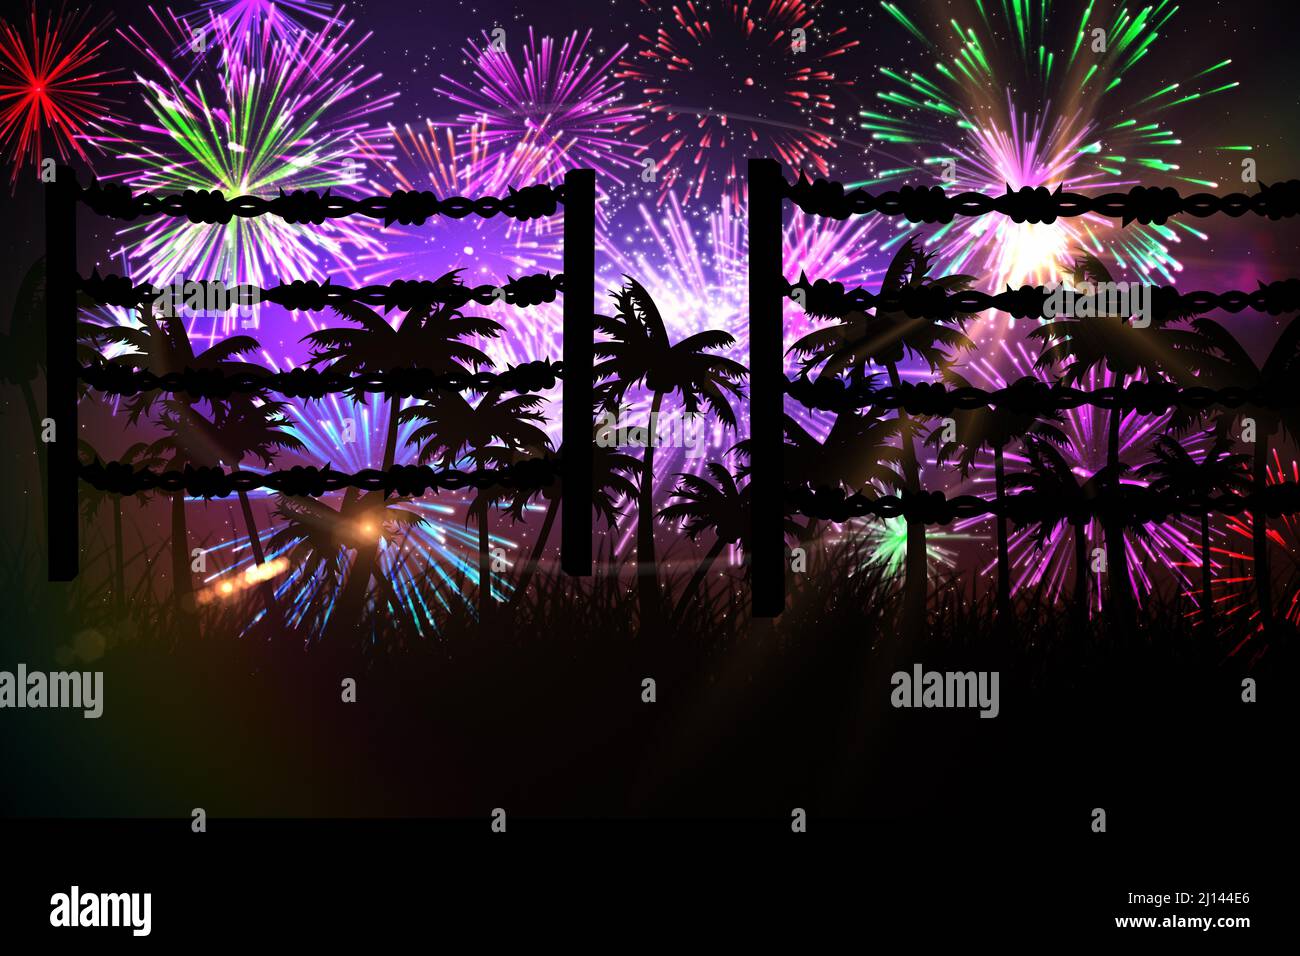 Barbed wire over silhouette of palm trees against fireworks exploding against black background Stock Photo